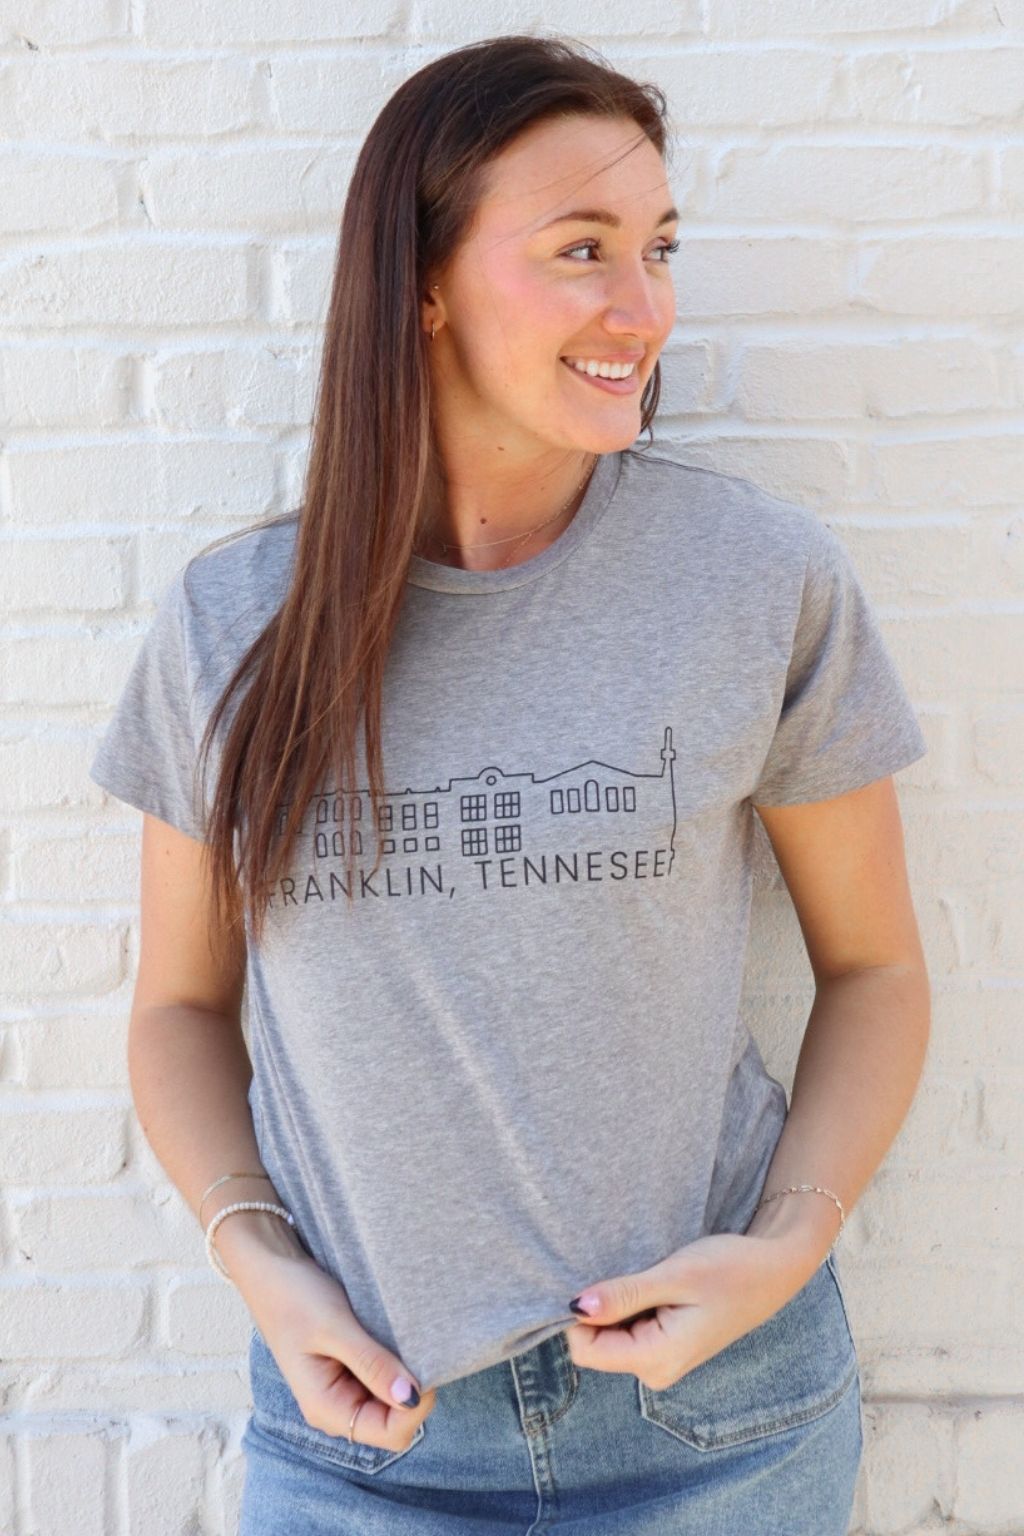 Franklin Graphic T-Shirt